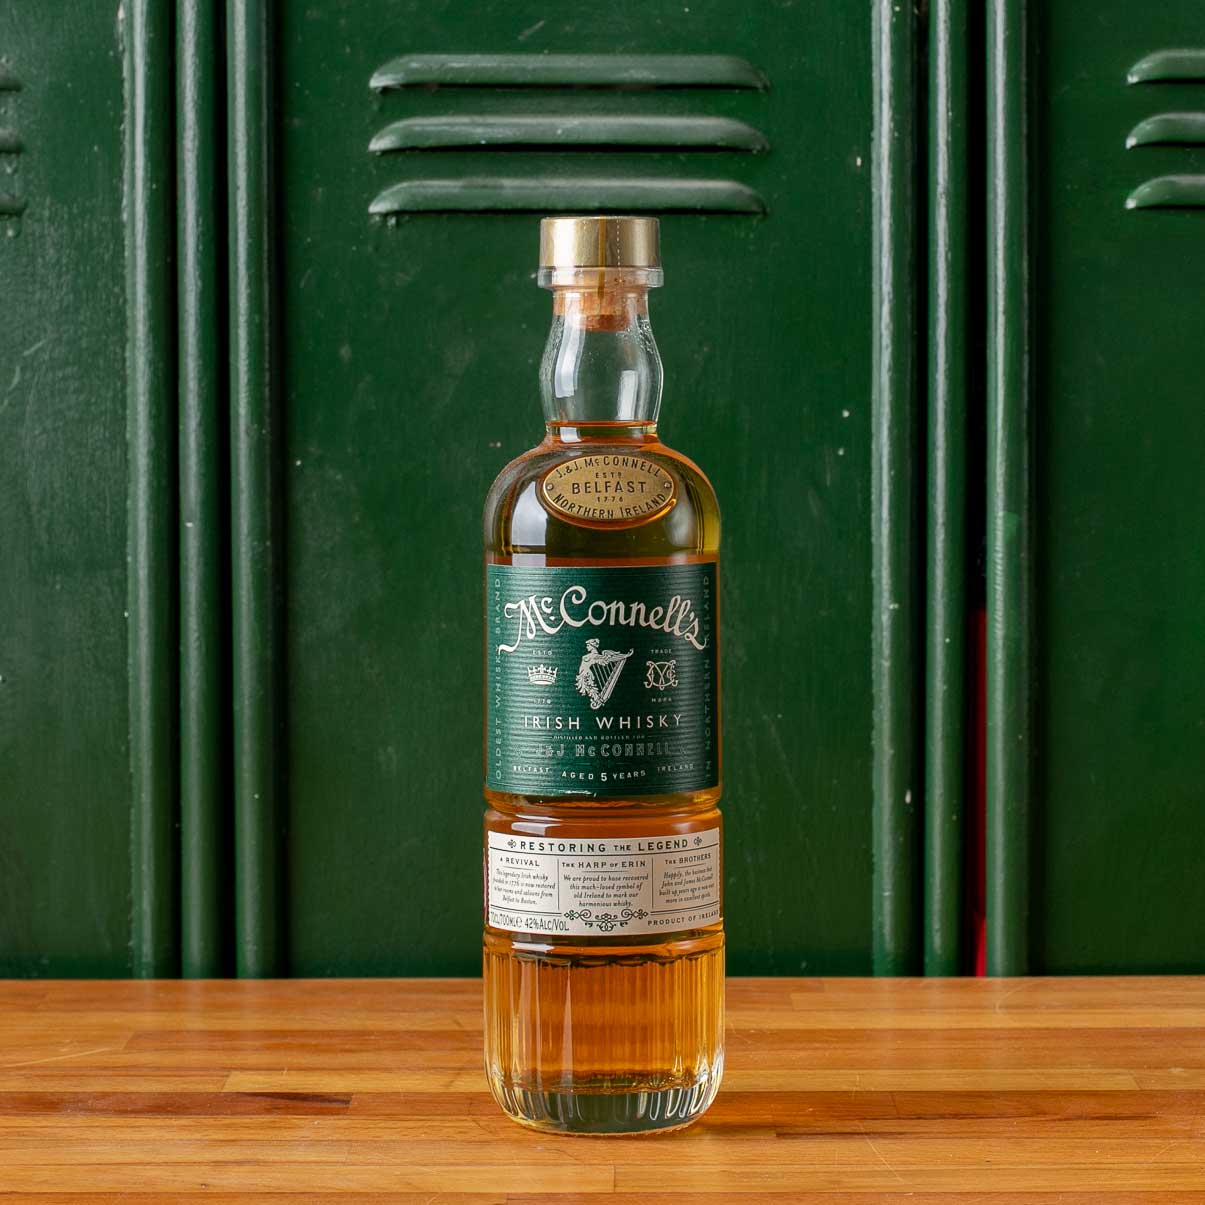 McConnell's 5 Year Old Irish Whiskey | The Umbrella Project